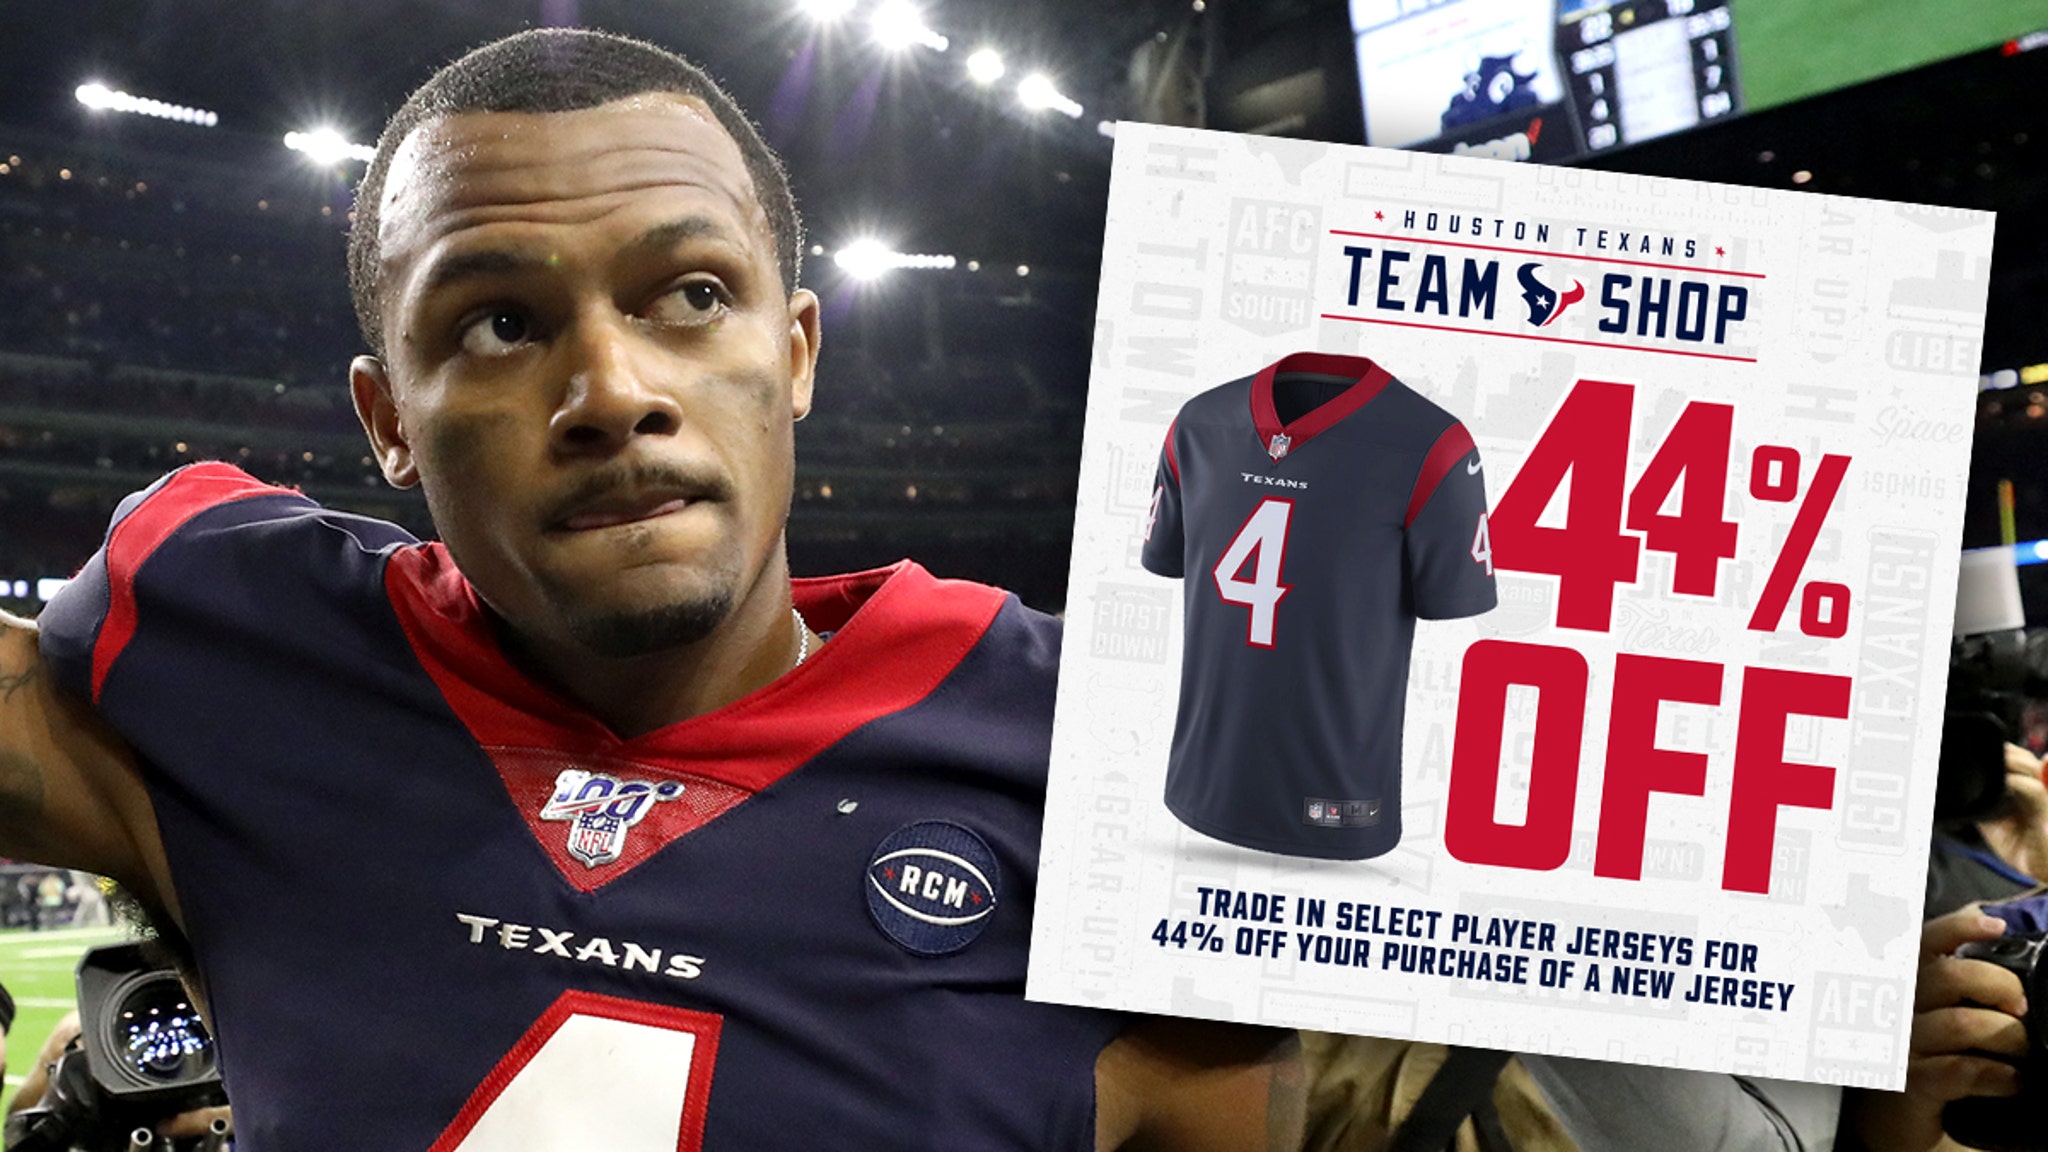 New Houston Texans gear released at team shop